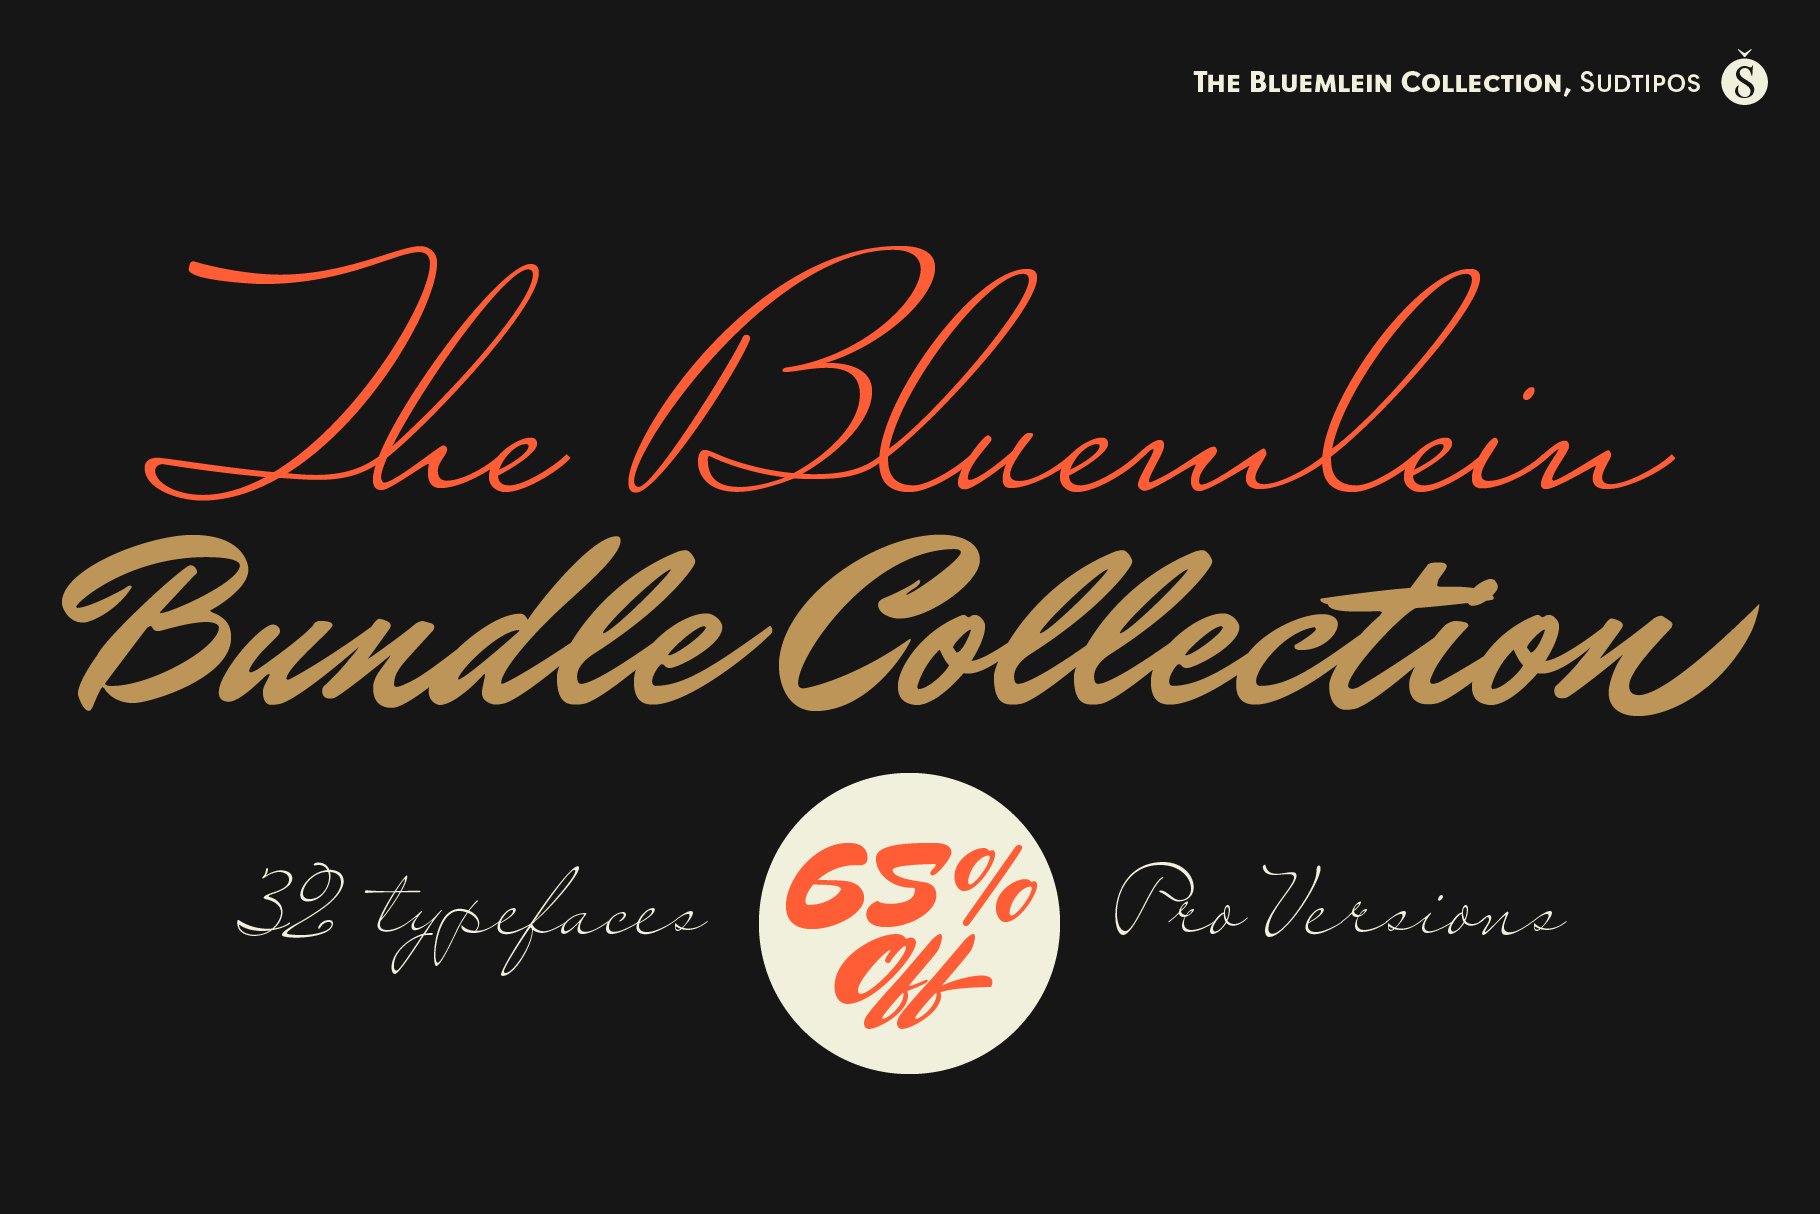 The Bluemlein Bundle Collection. cover image.